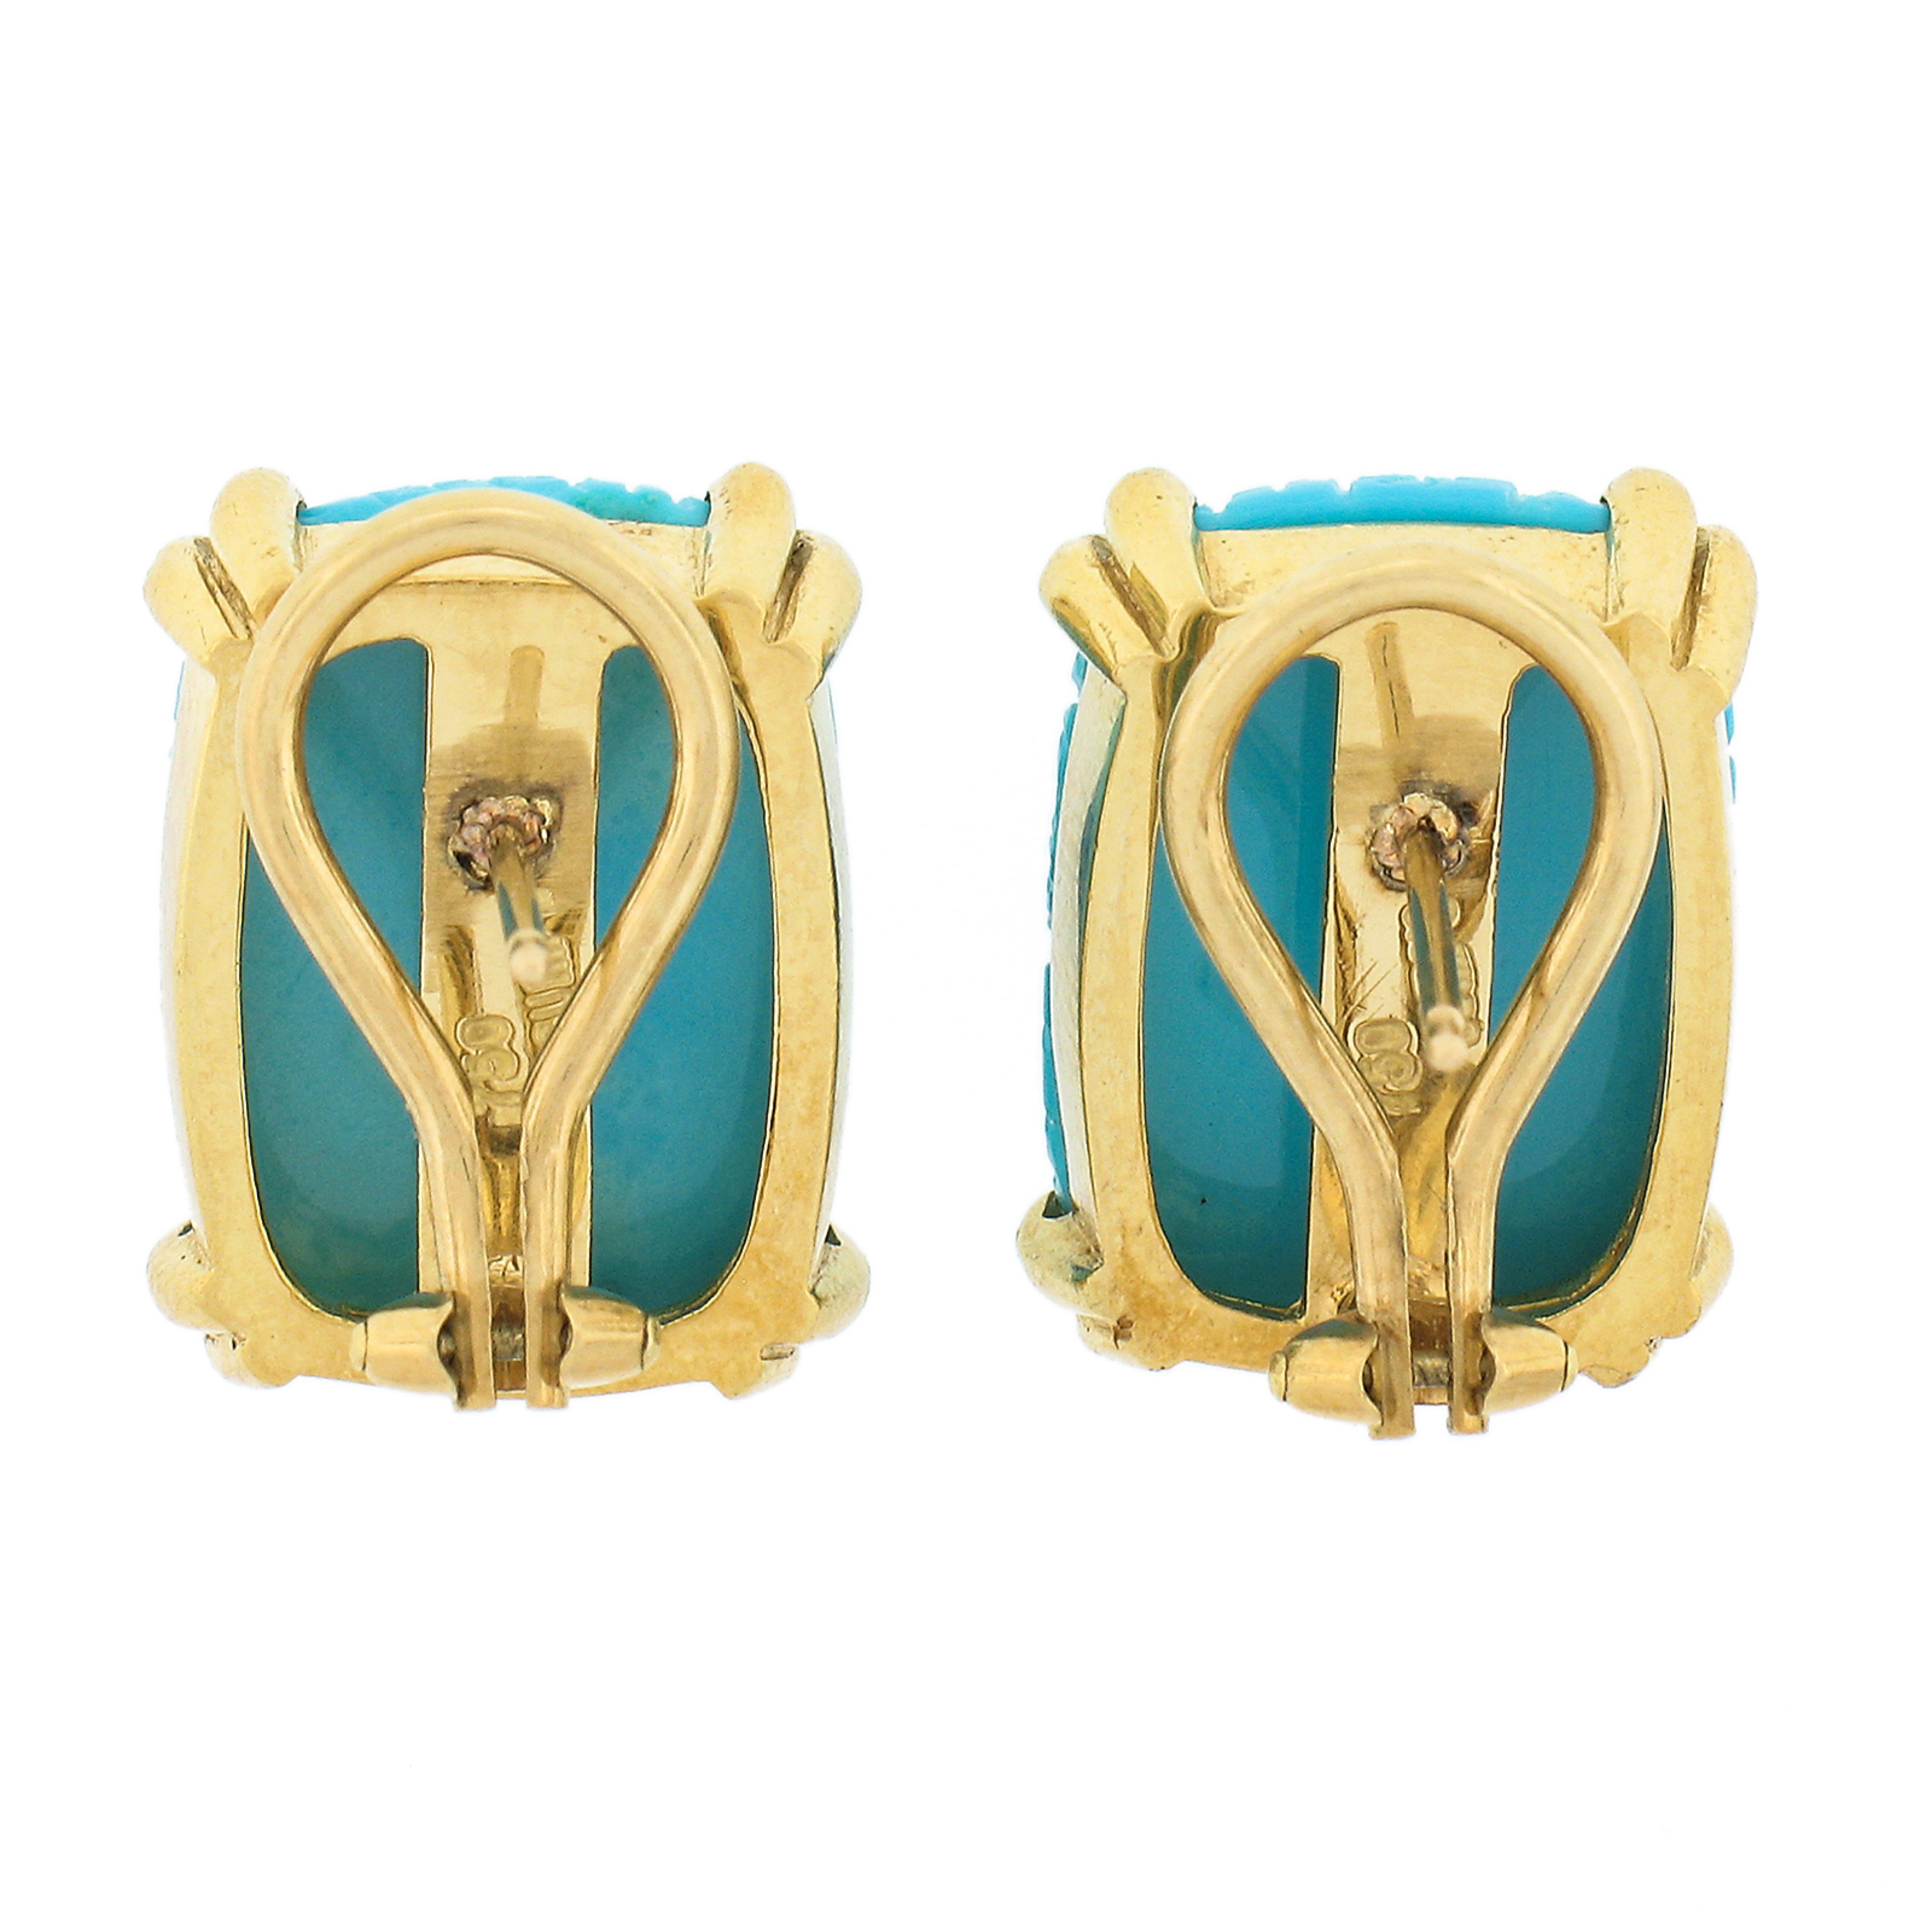 Cushion Cut Vintage Gump's 18k Gold Carved Basket Weave Elongated Cushion Turquoise Earrings For Sale